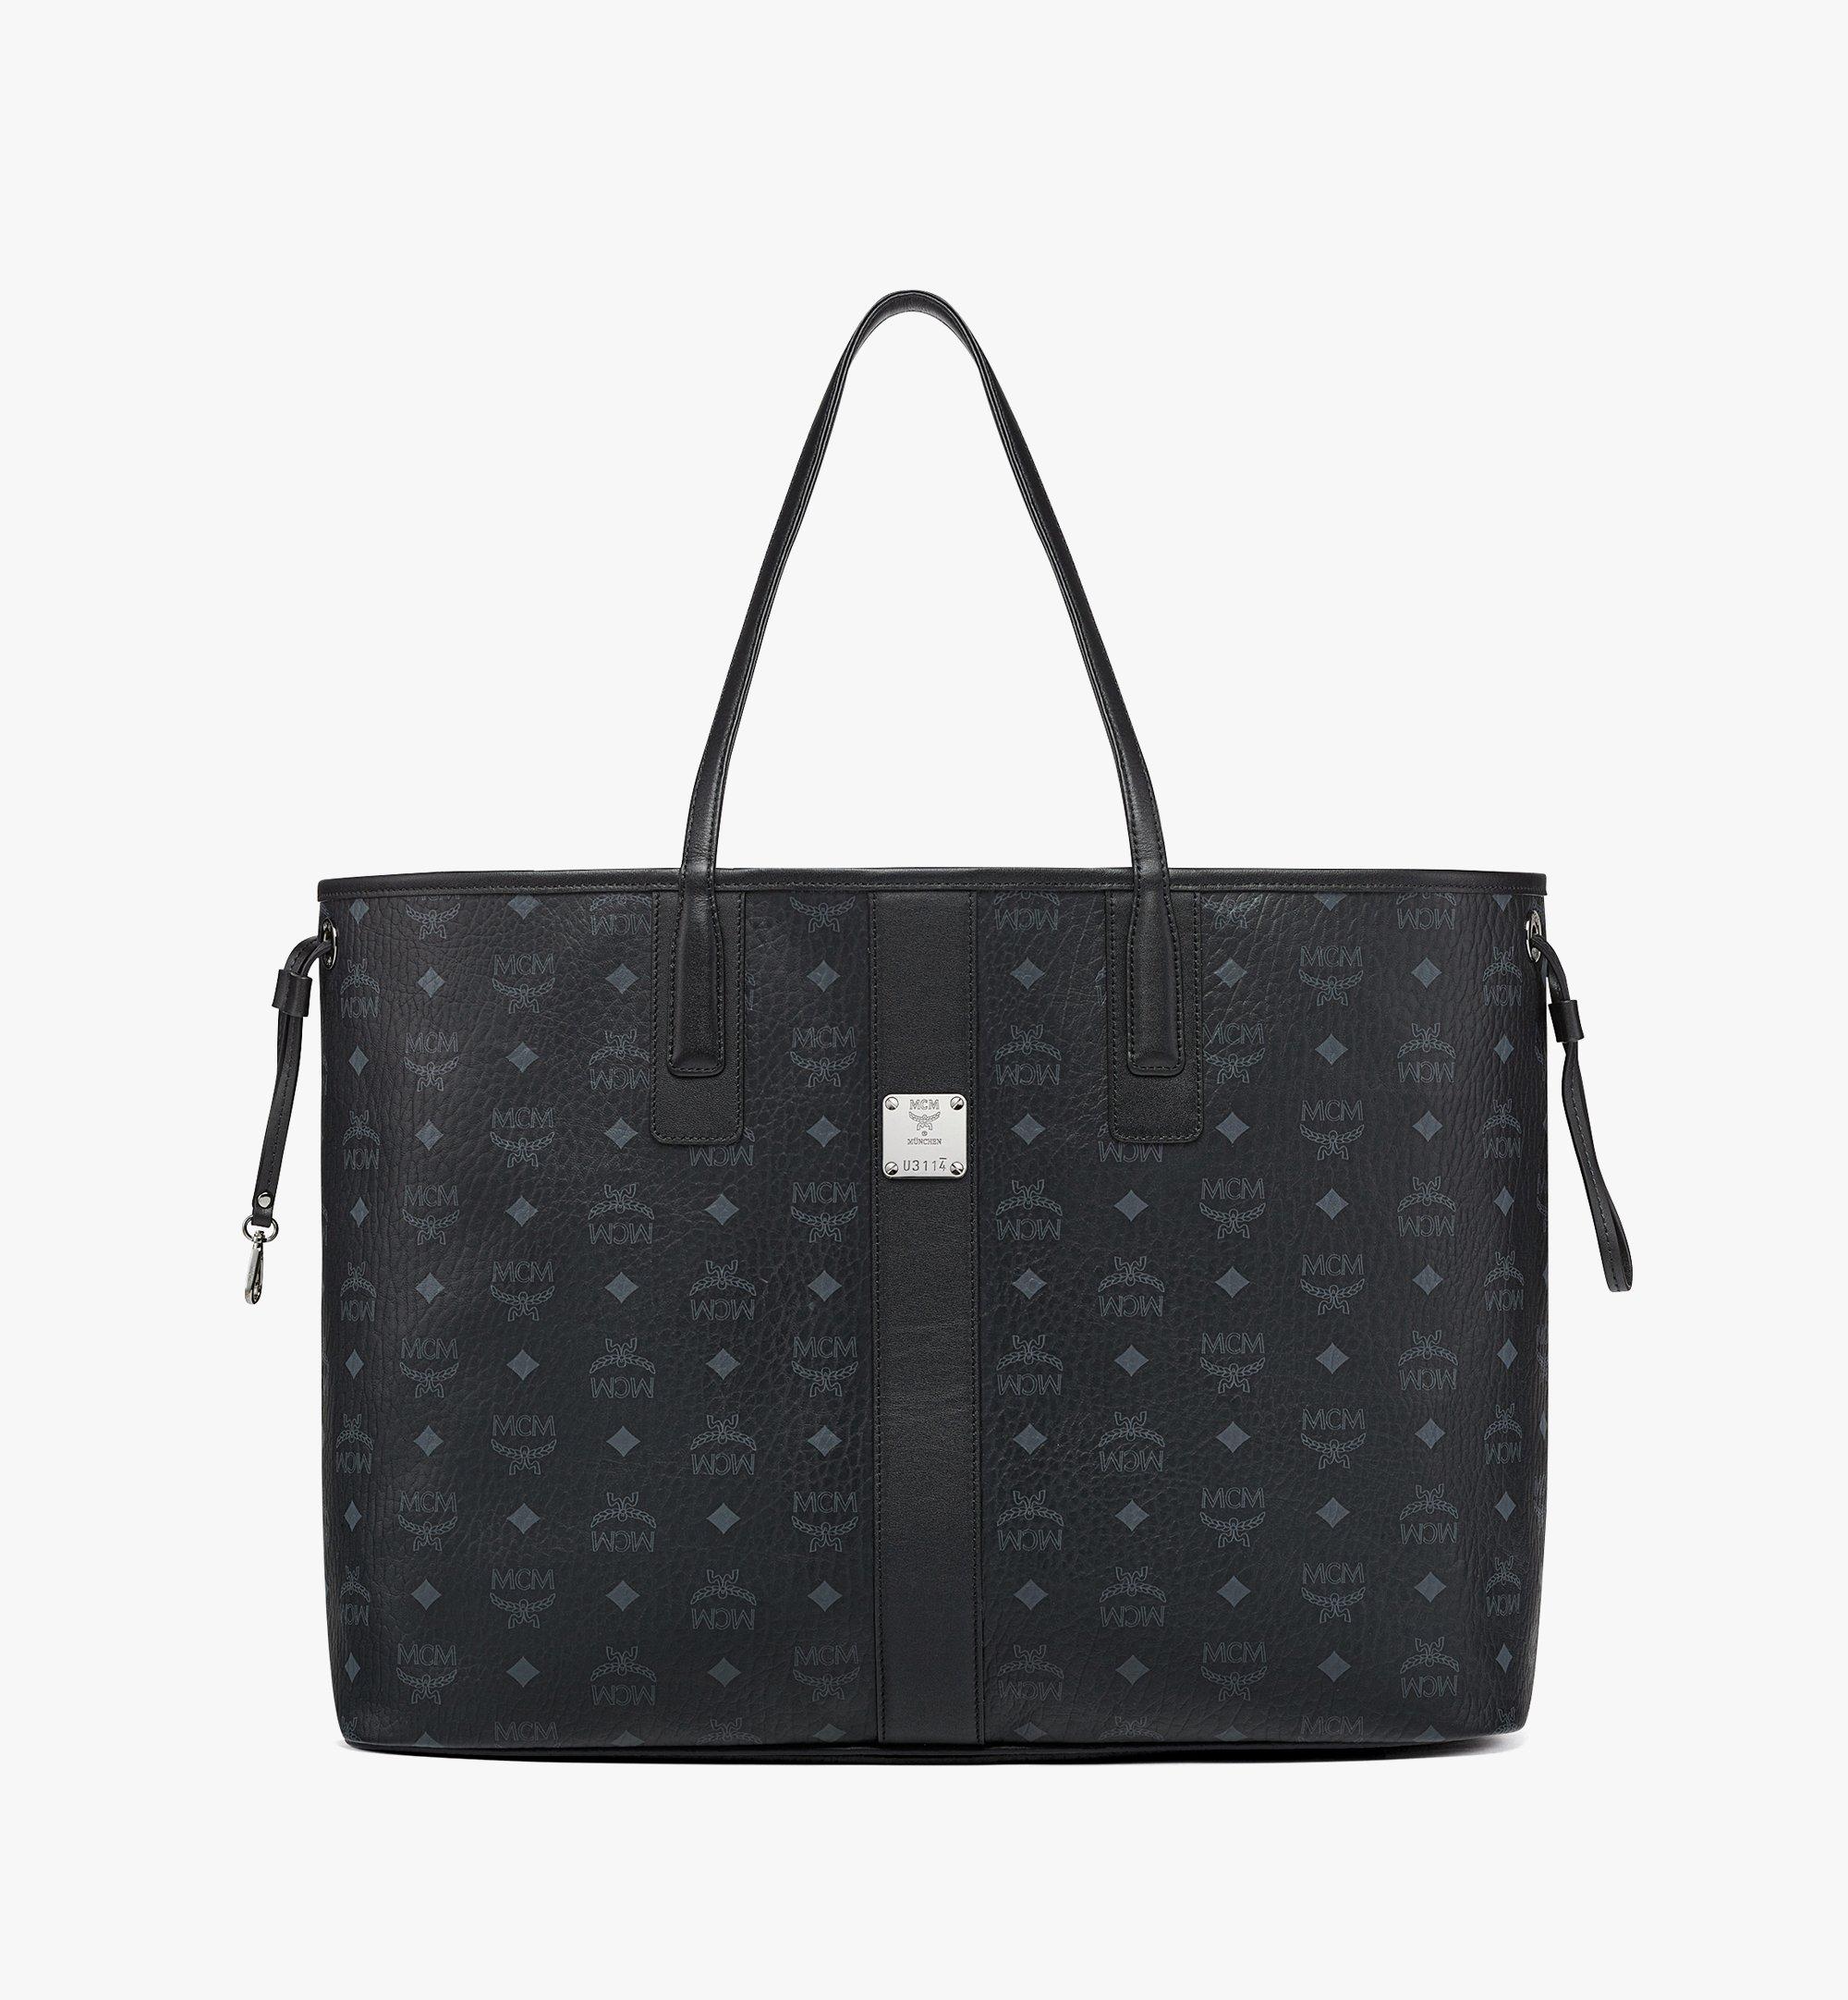 Designer Leather Shopper & Tote Bags for Women | MCM® US